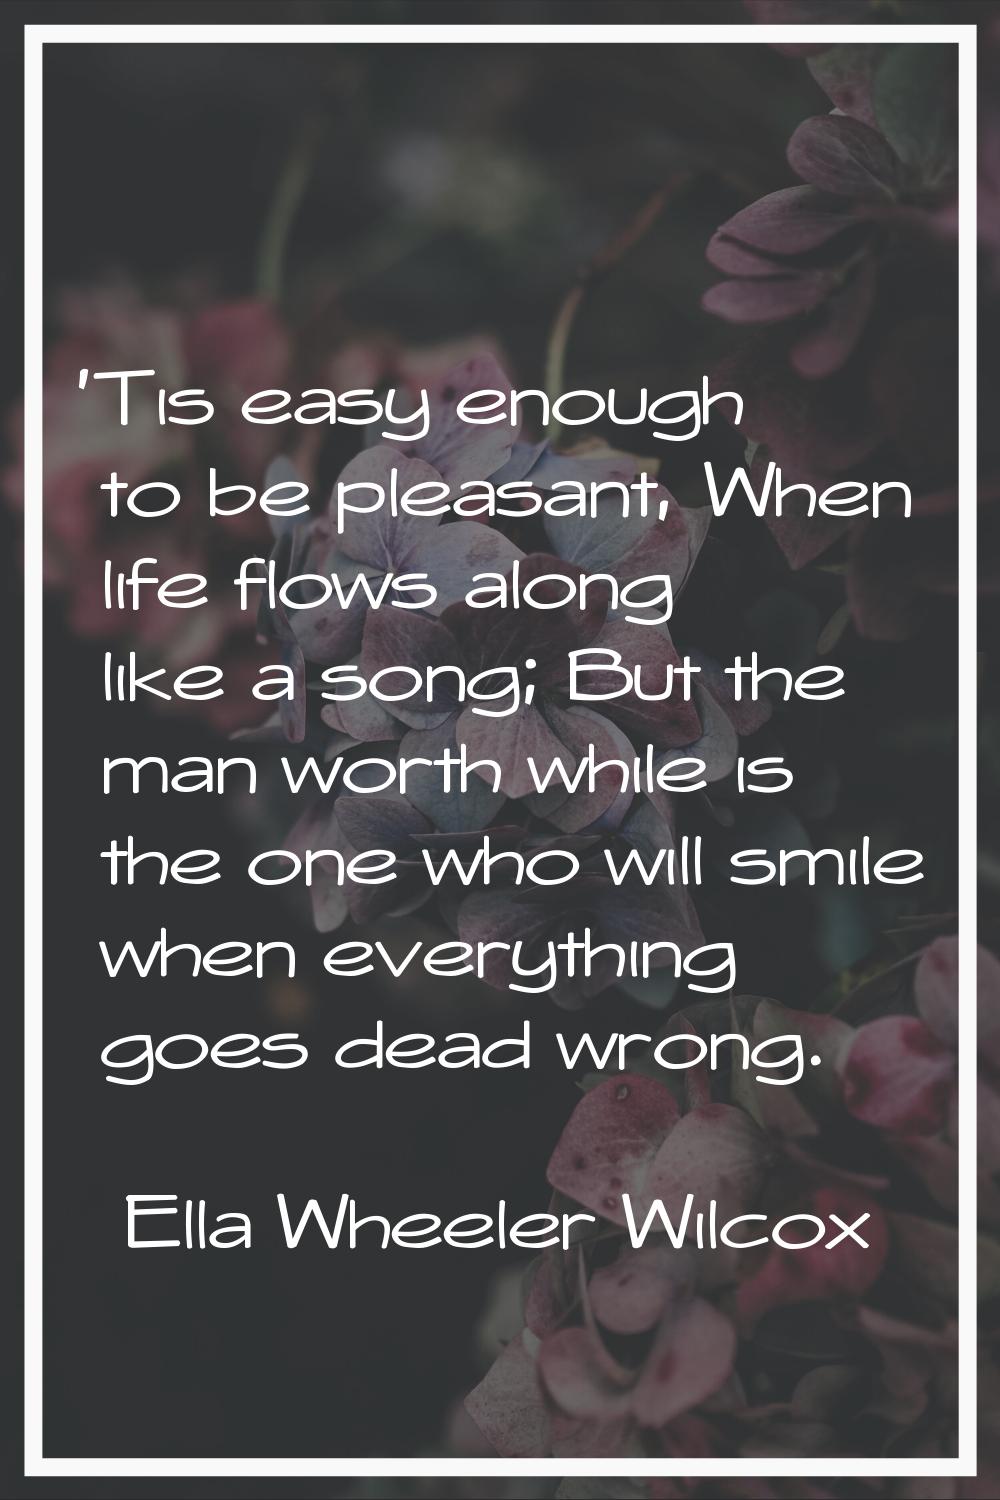 'Tis easy enough to be pleasant, When life flows along like a song; But the man worth while is the 